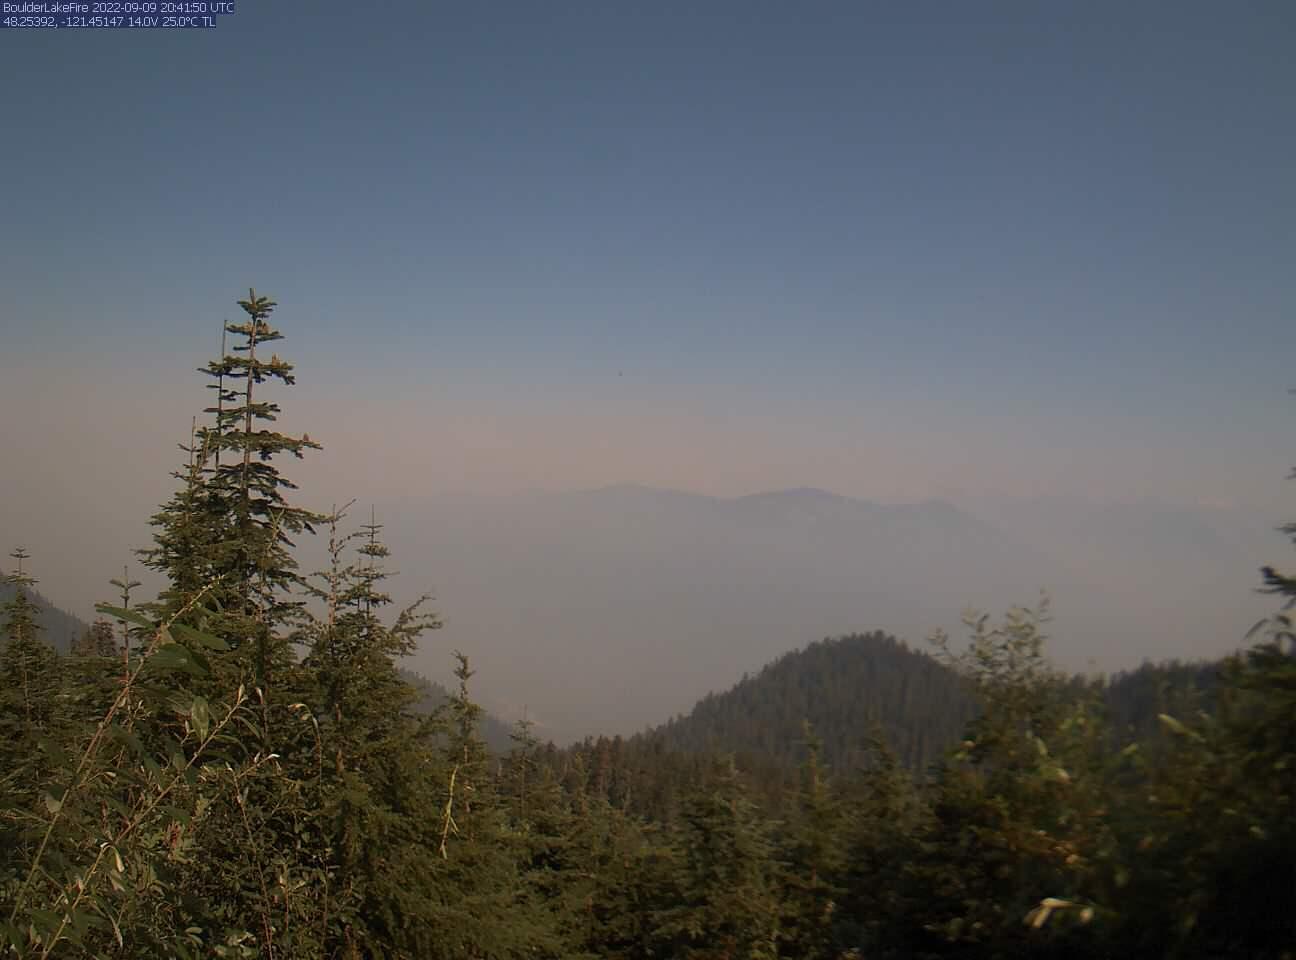 Smoky conditions over the Boulder Lake Fire, September 9